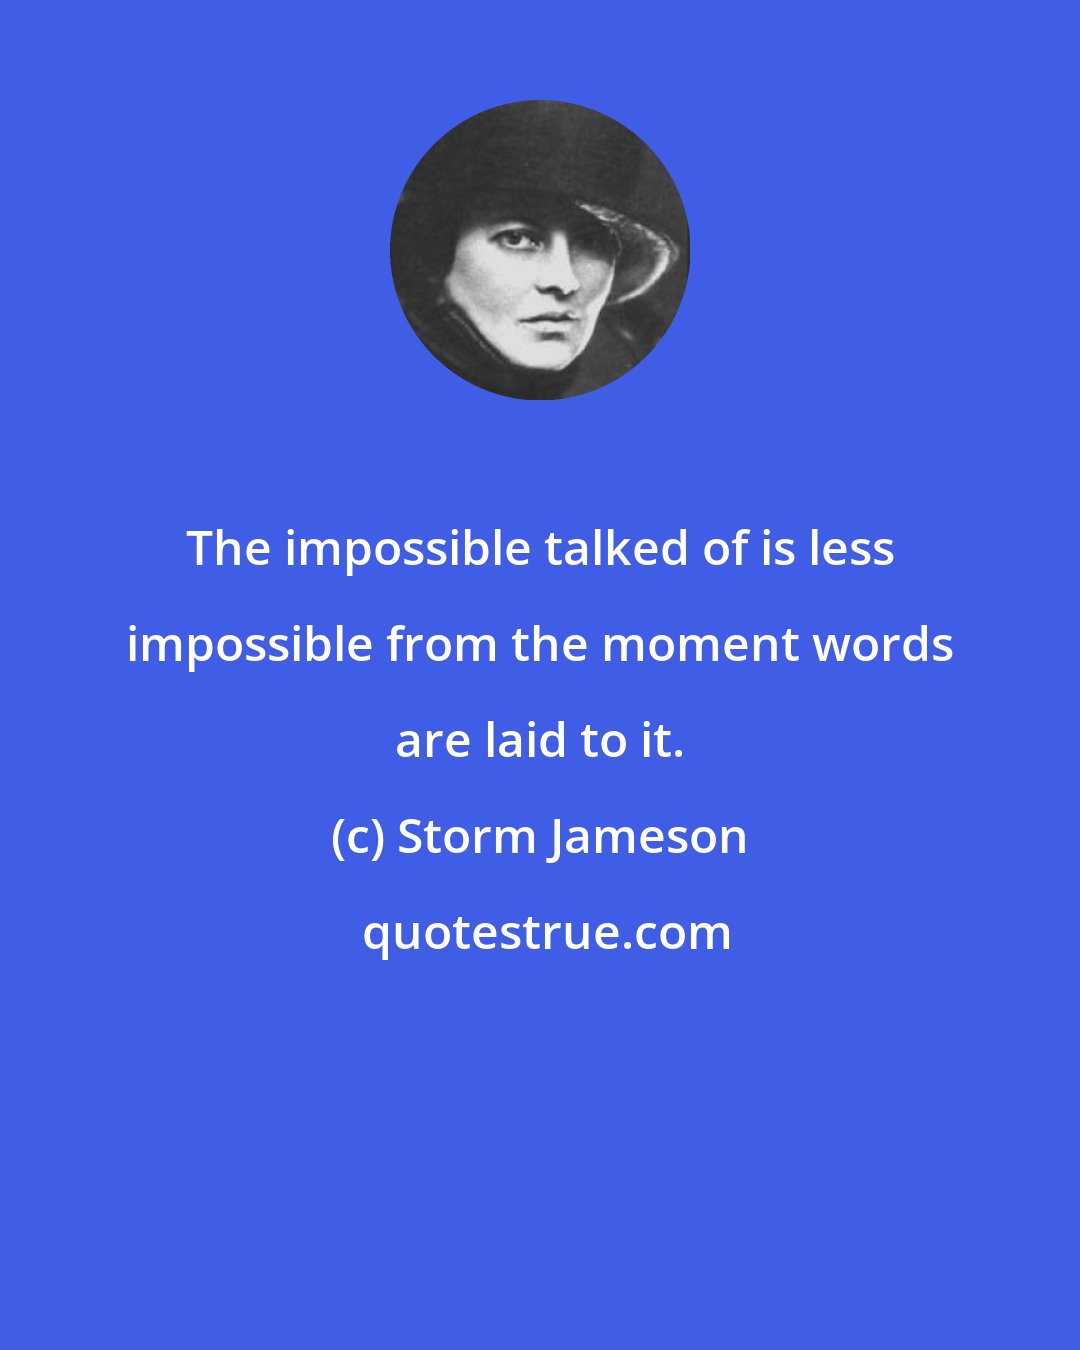 Storm Jameson: The impossible talked of is less impossible from the moment words are laid to it.